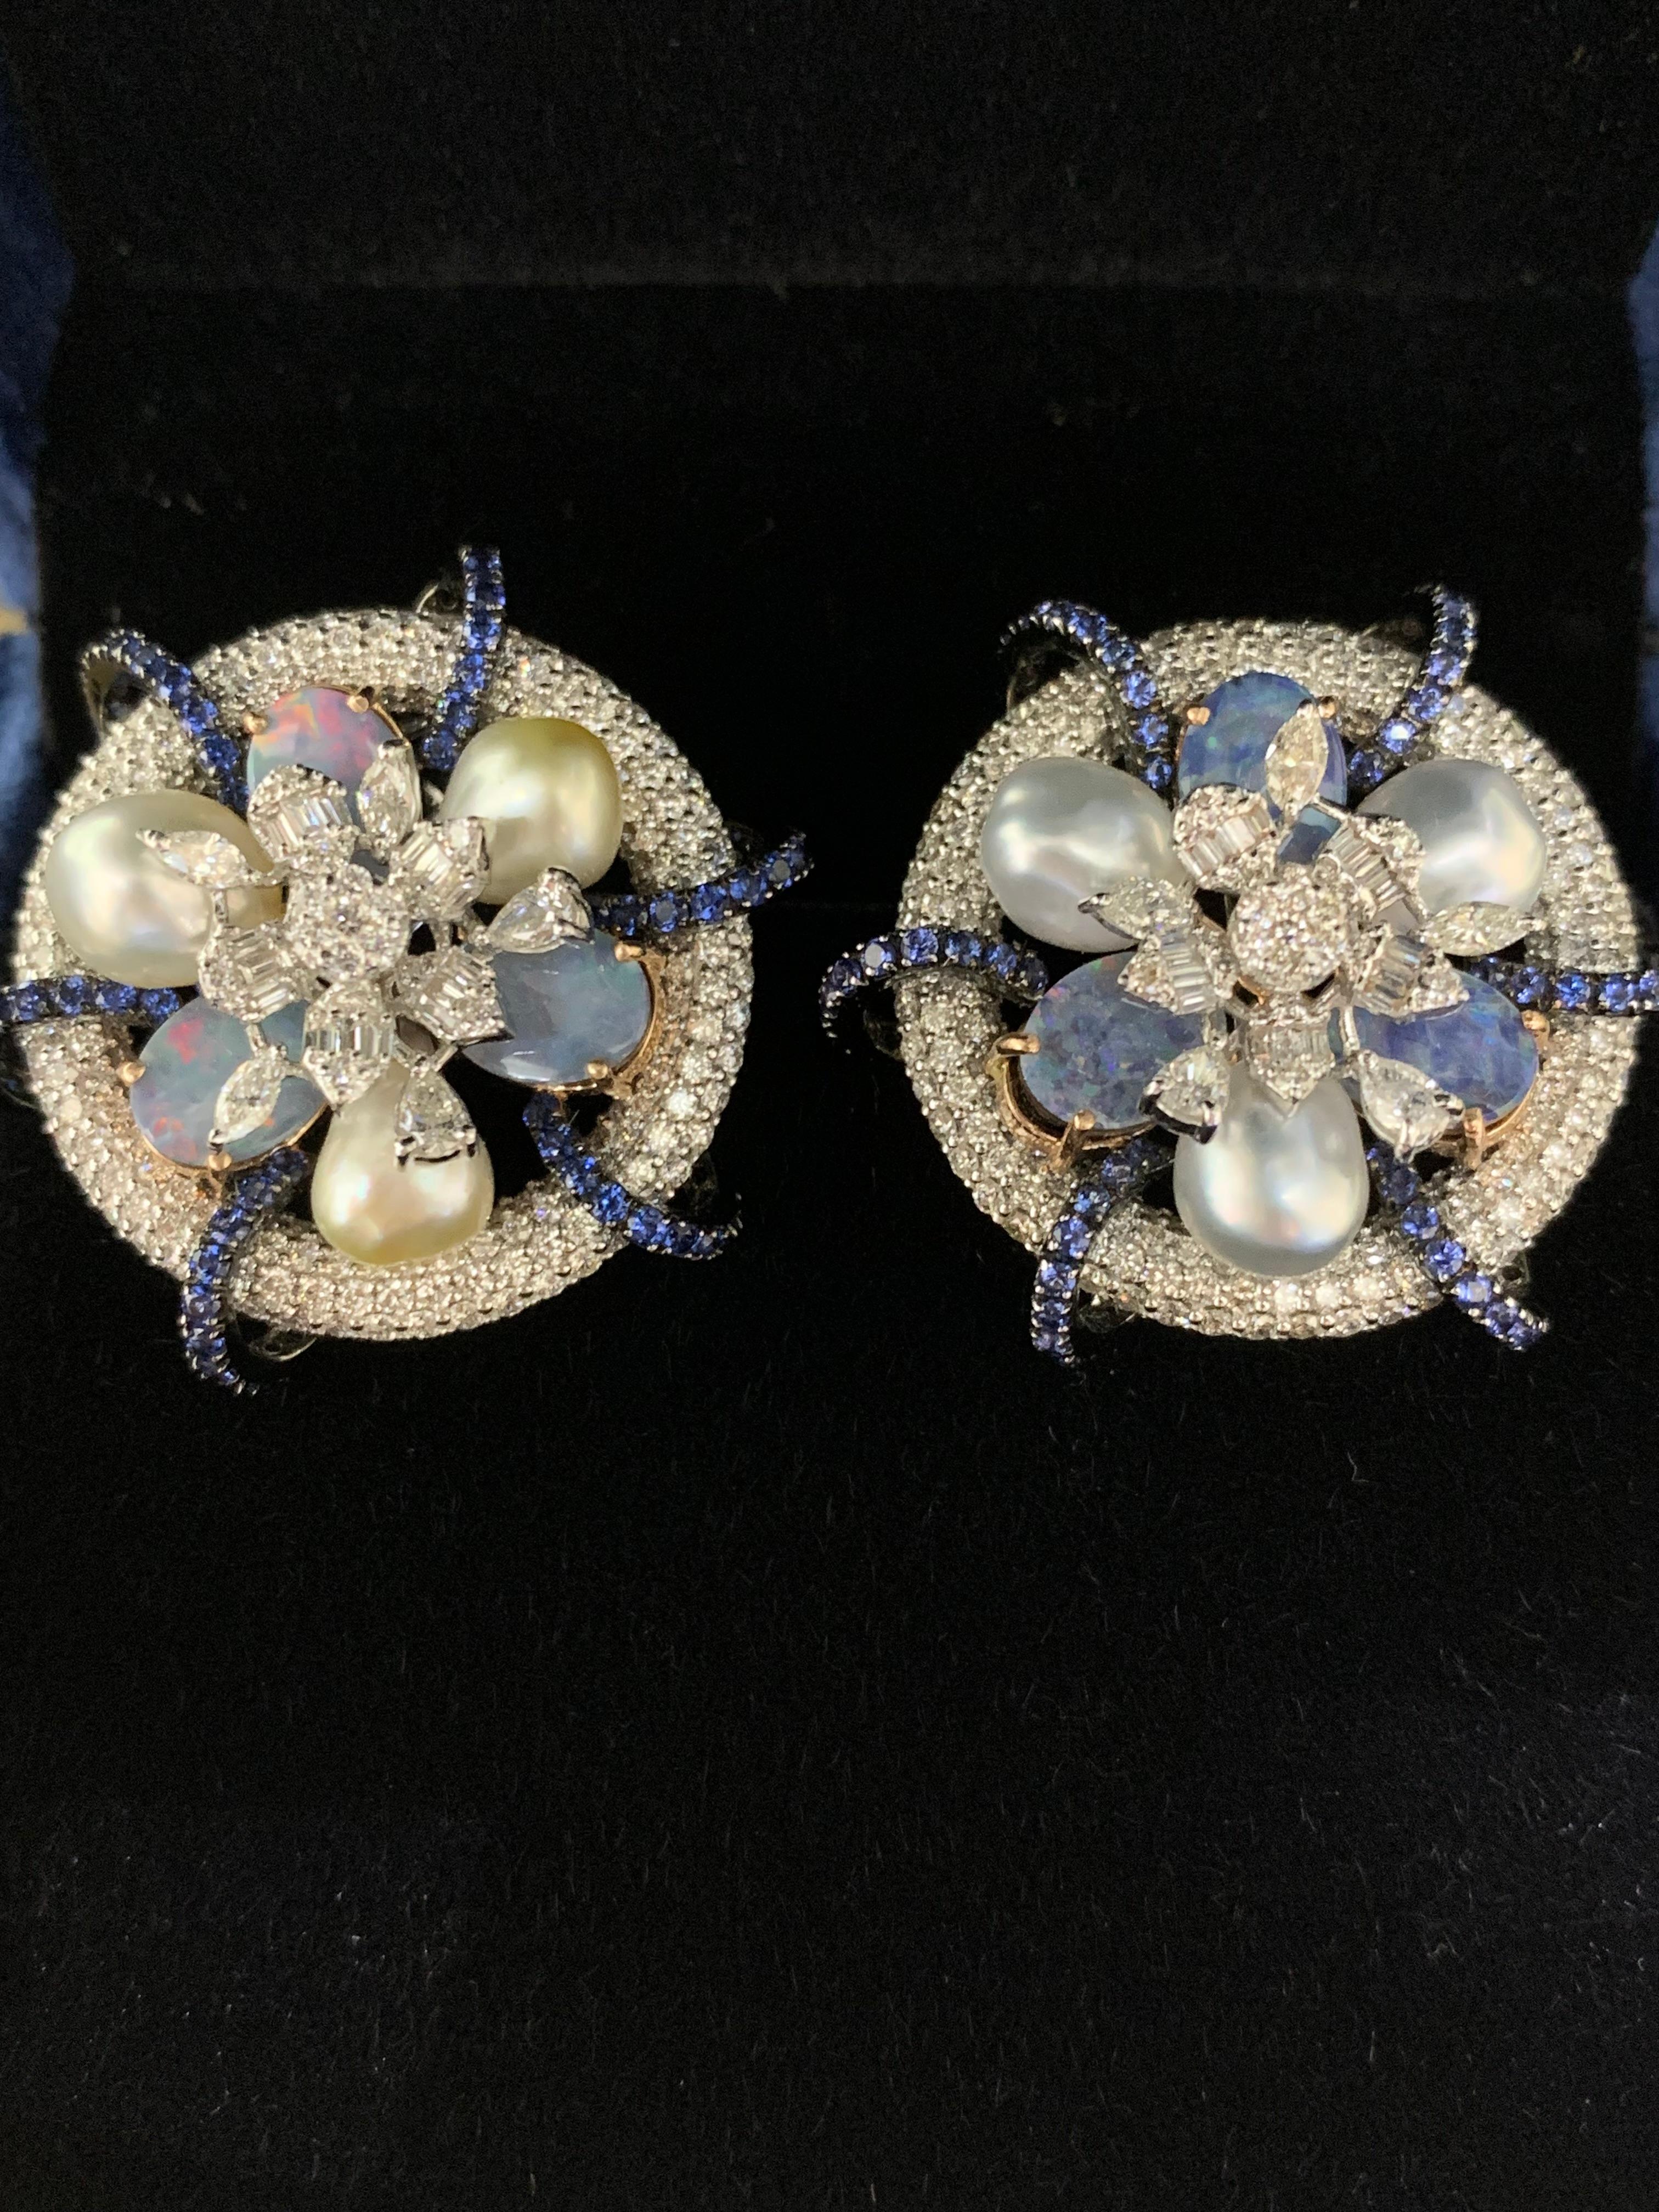 Statement earrings are great for making a powerful impression.

Diamond Weight: 4.94 carats
Gold Weight: 19.010 gms
Pearl Weight: 10.41 carats
Color Stone: 5.67 carats